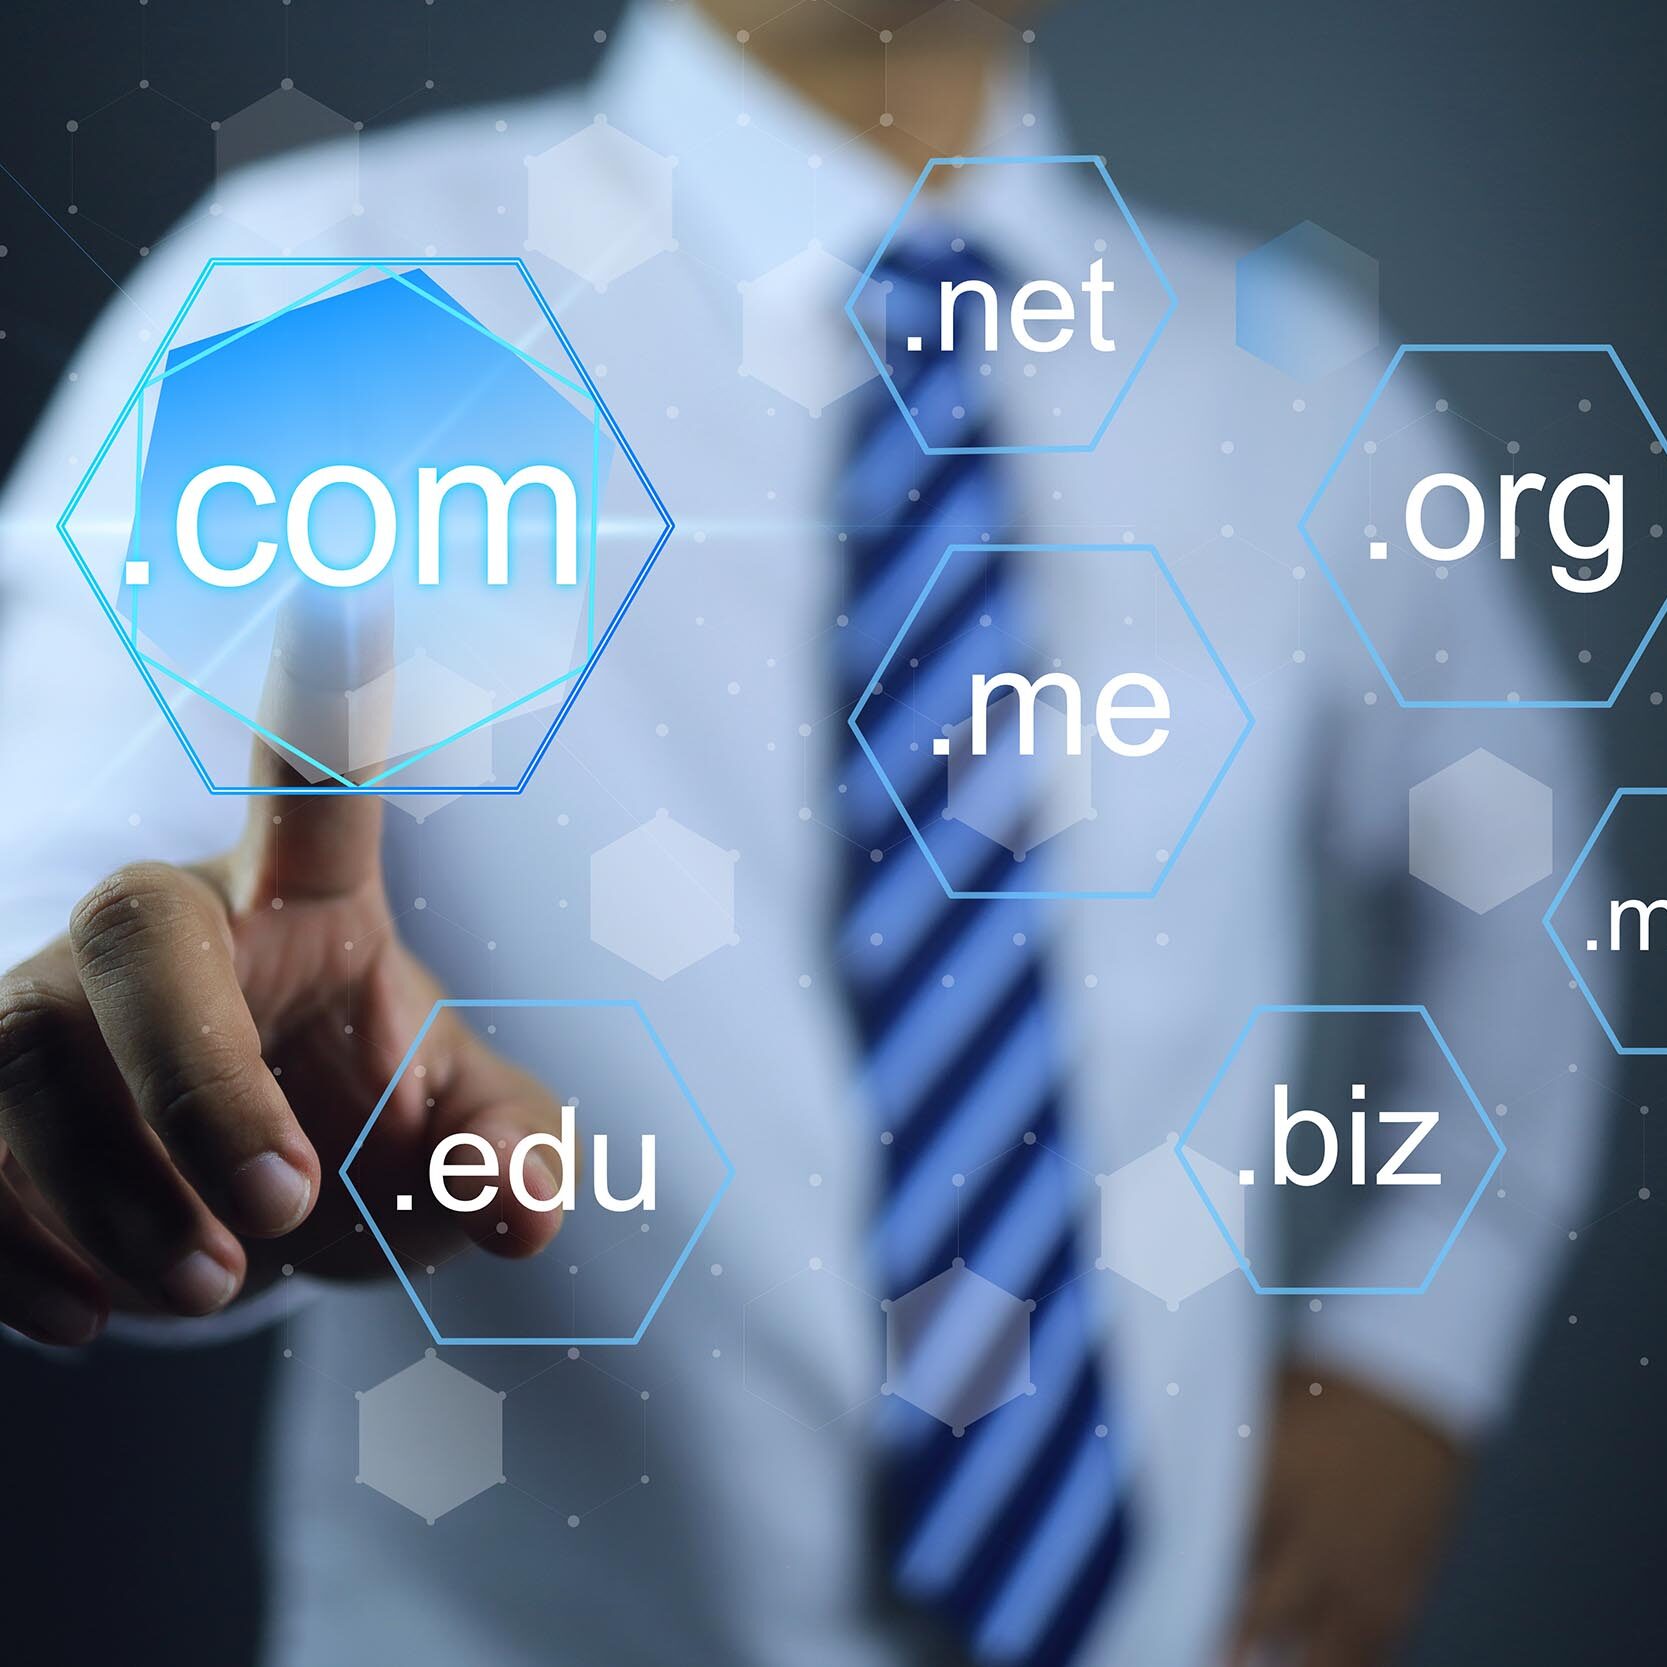 Businessman hand specified to touch and choosen sub domain name to dot com or .com to registeration the commercial website. Domain selection concept.